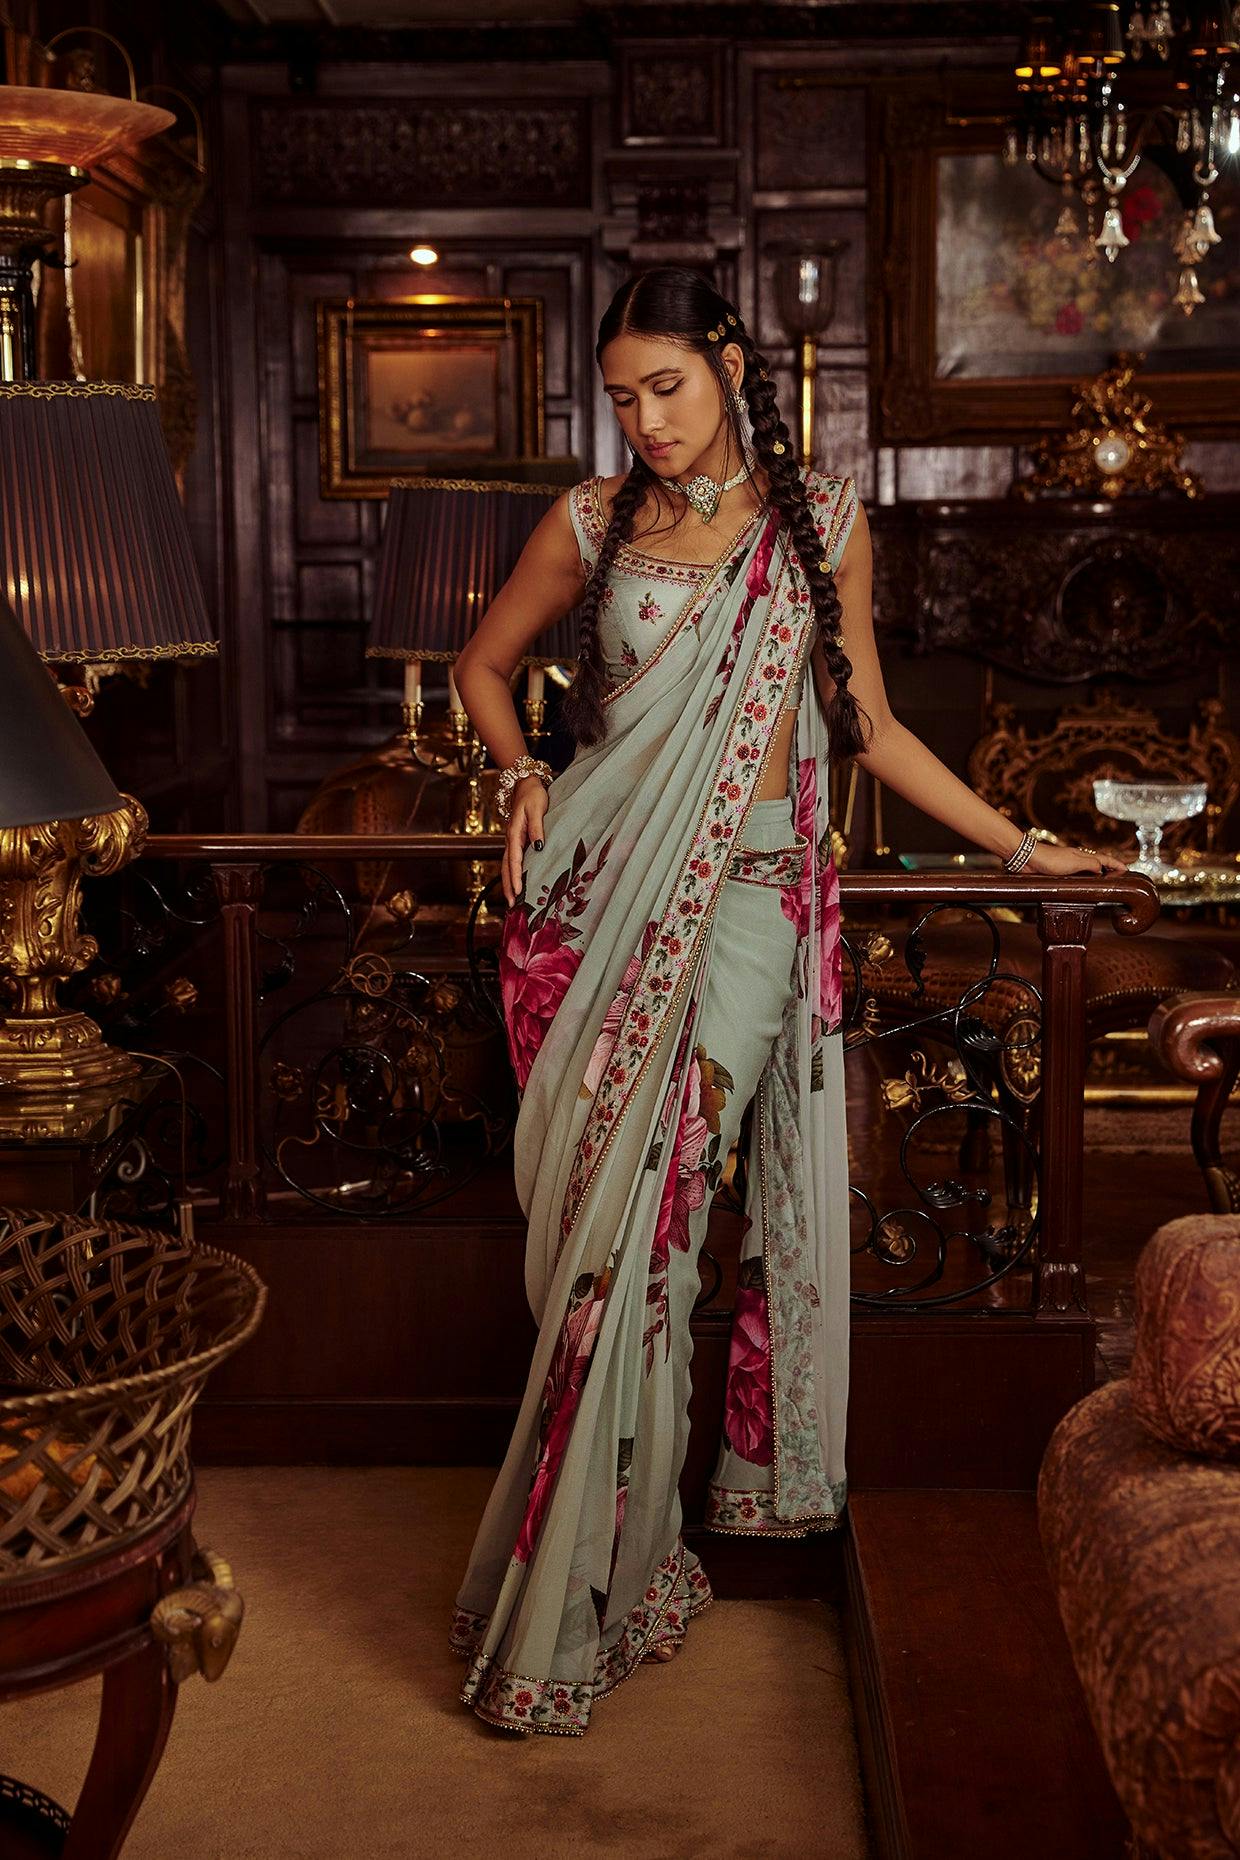 Idika Vintage Rose Handcrafted Saree, a product by Kalista